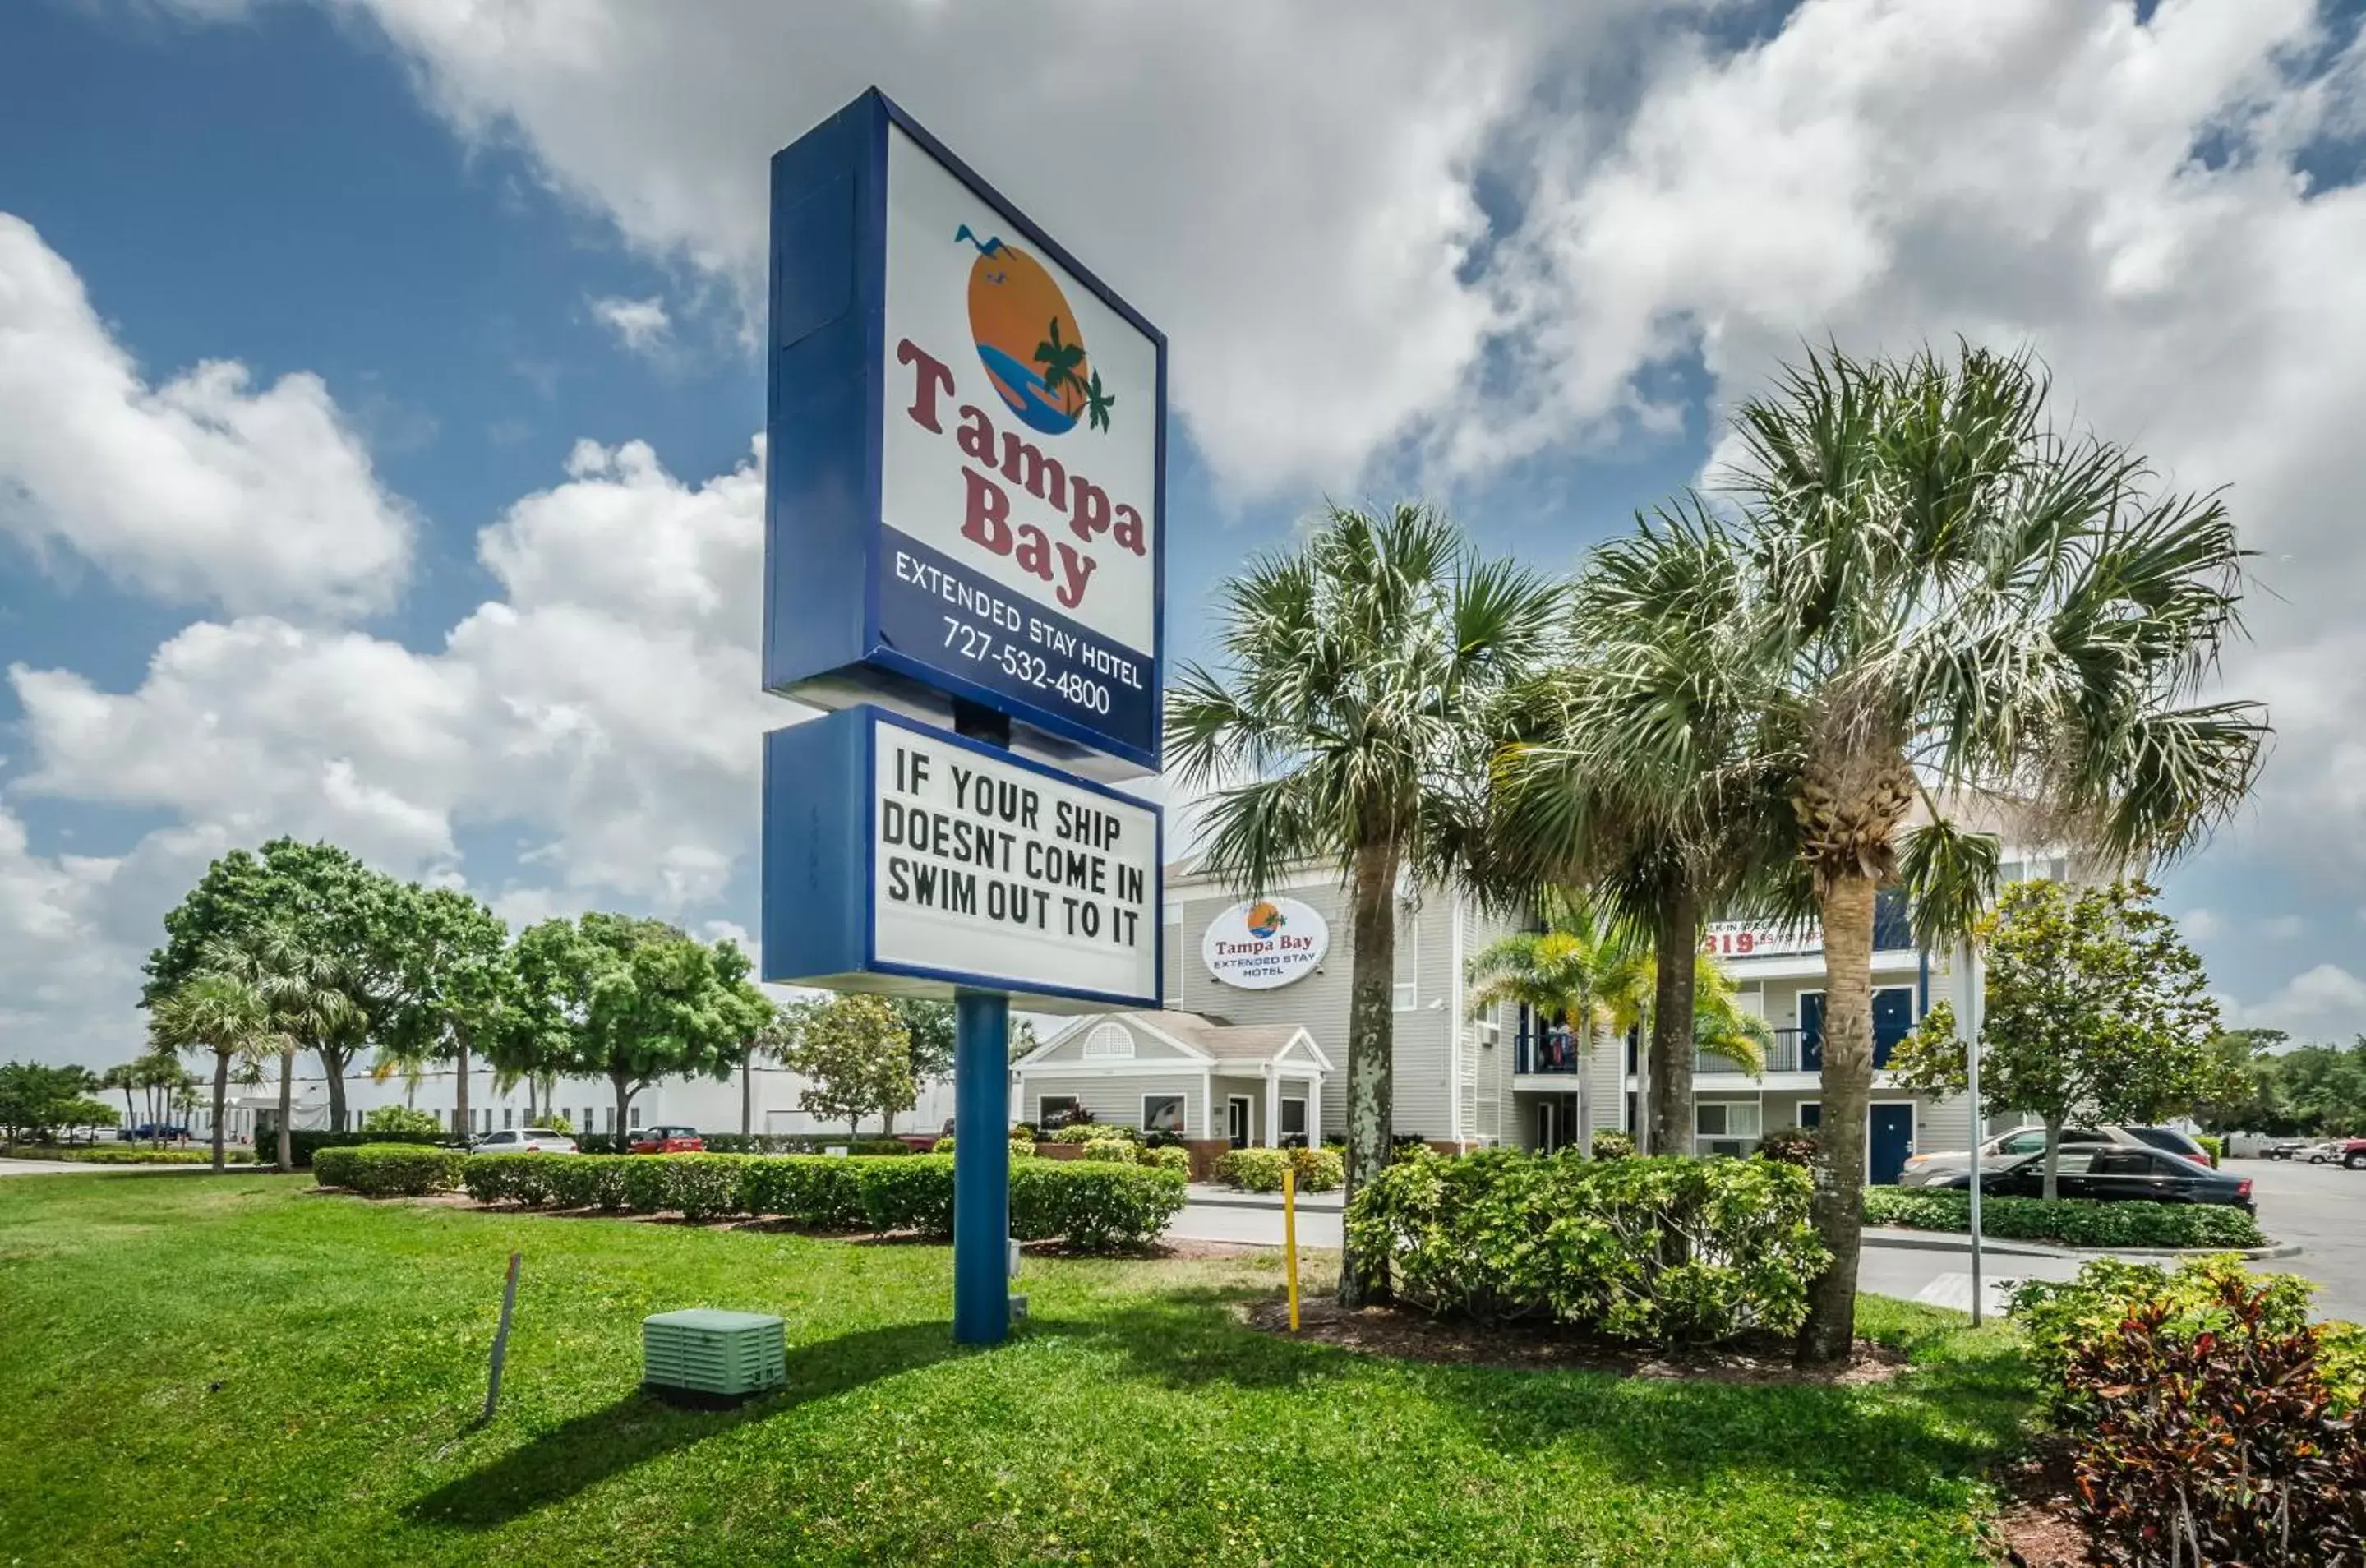 Property logo or sign, Garden in Tampa Bay Extended Stay Hotel